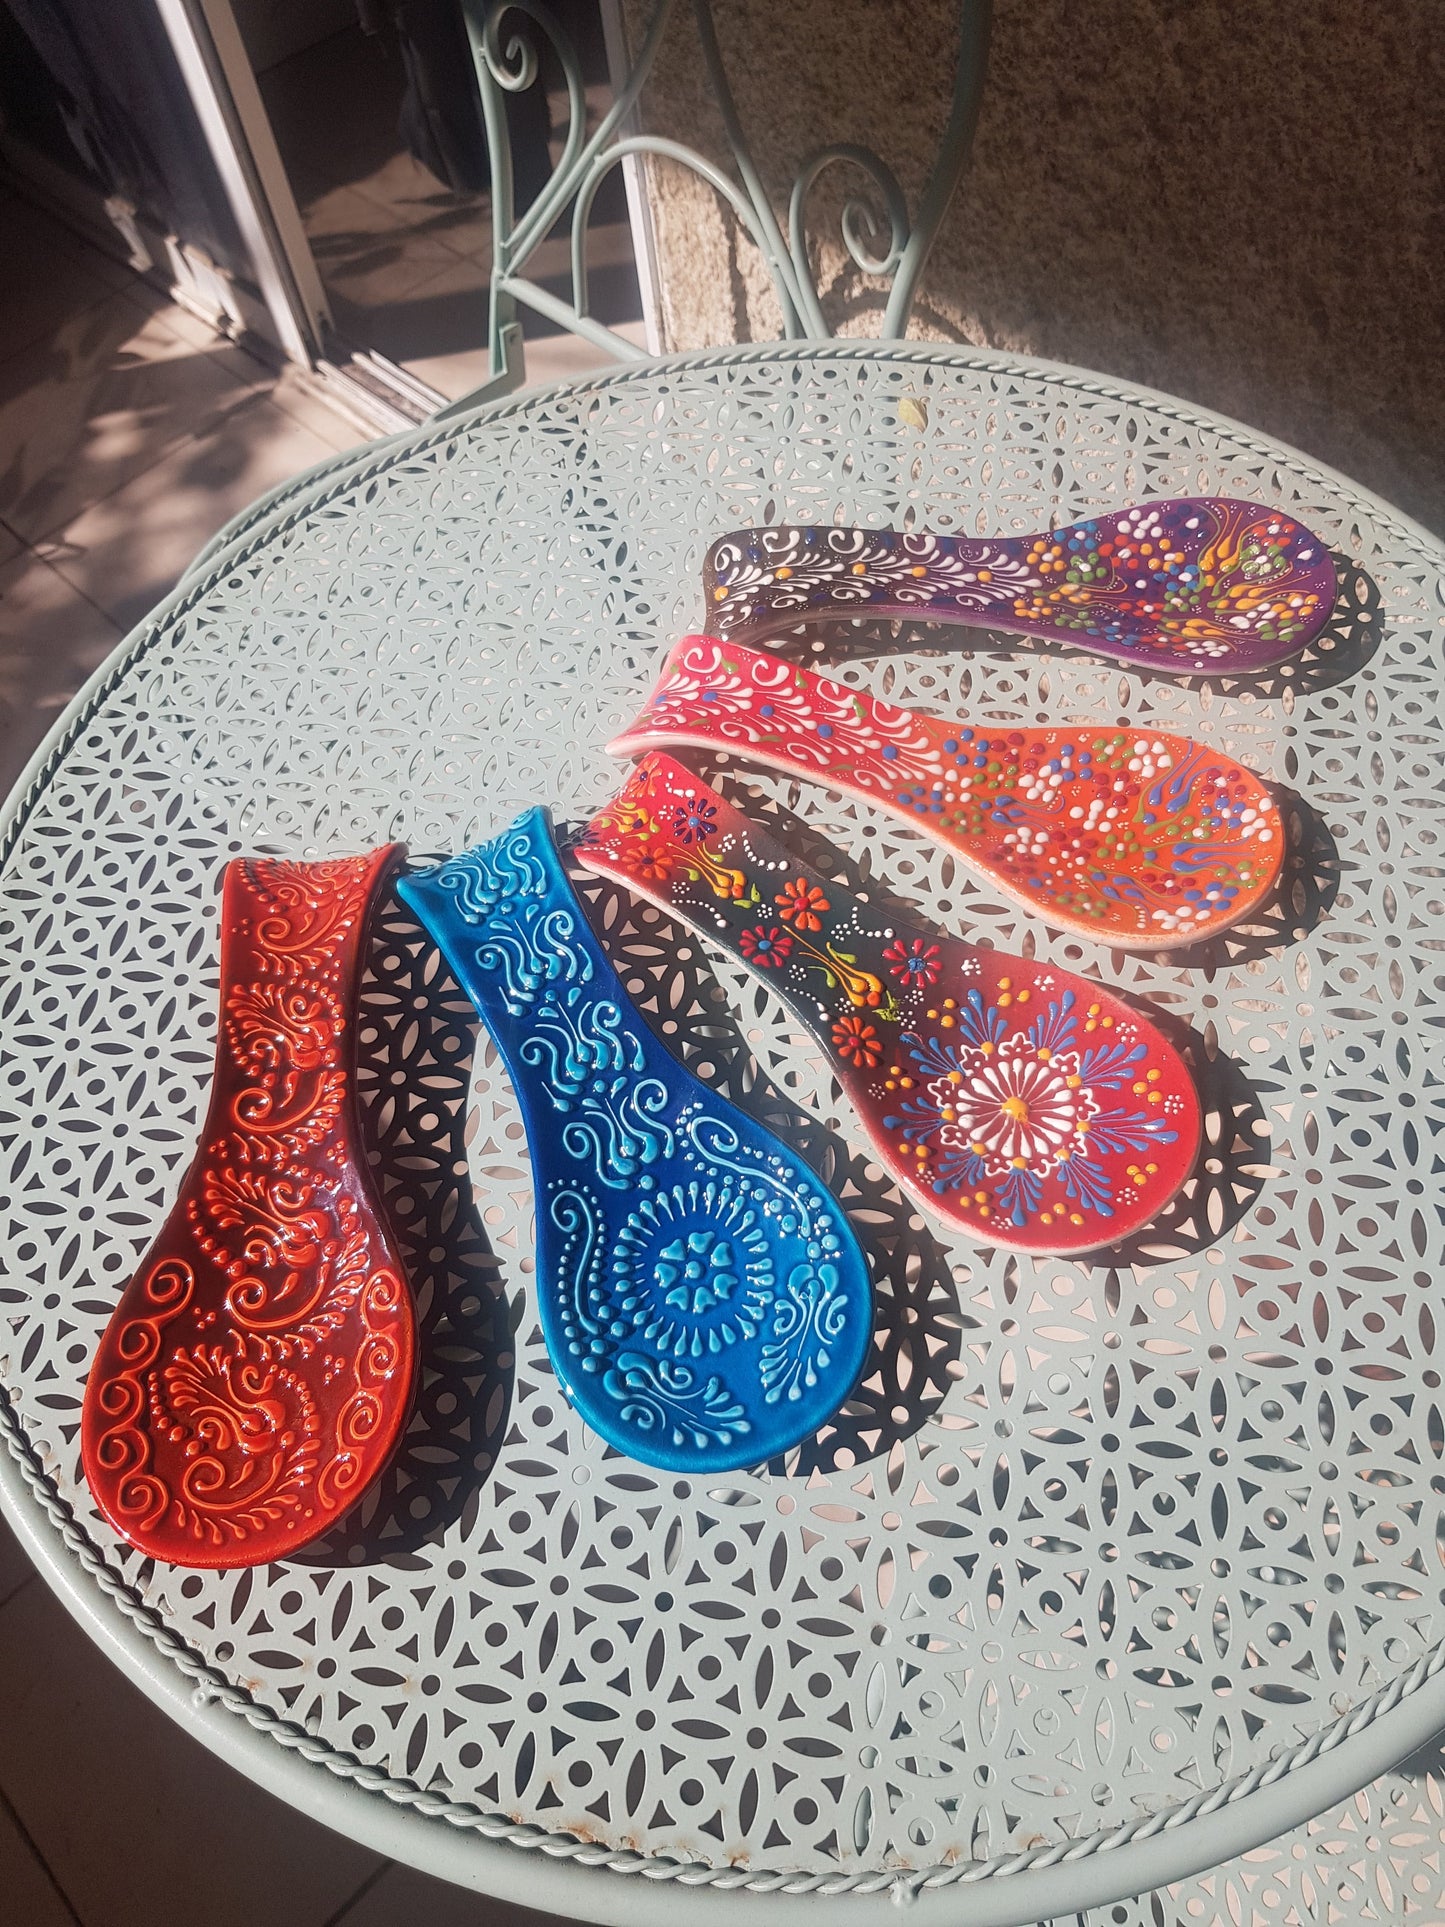 Bluenoemi Jewelry home-decor 14 / colourful Rest Spoon for serving or decoration. Armenian Ceramic. Gift for Home.